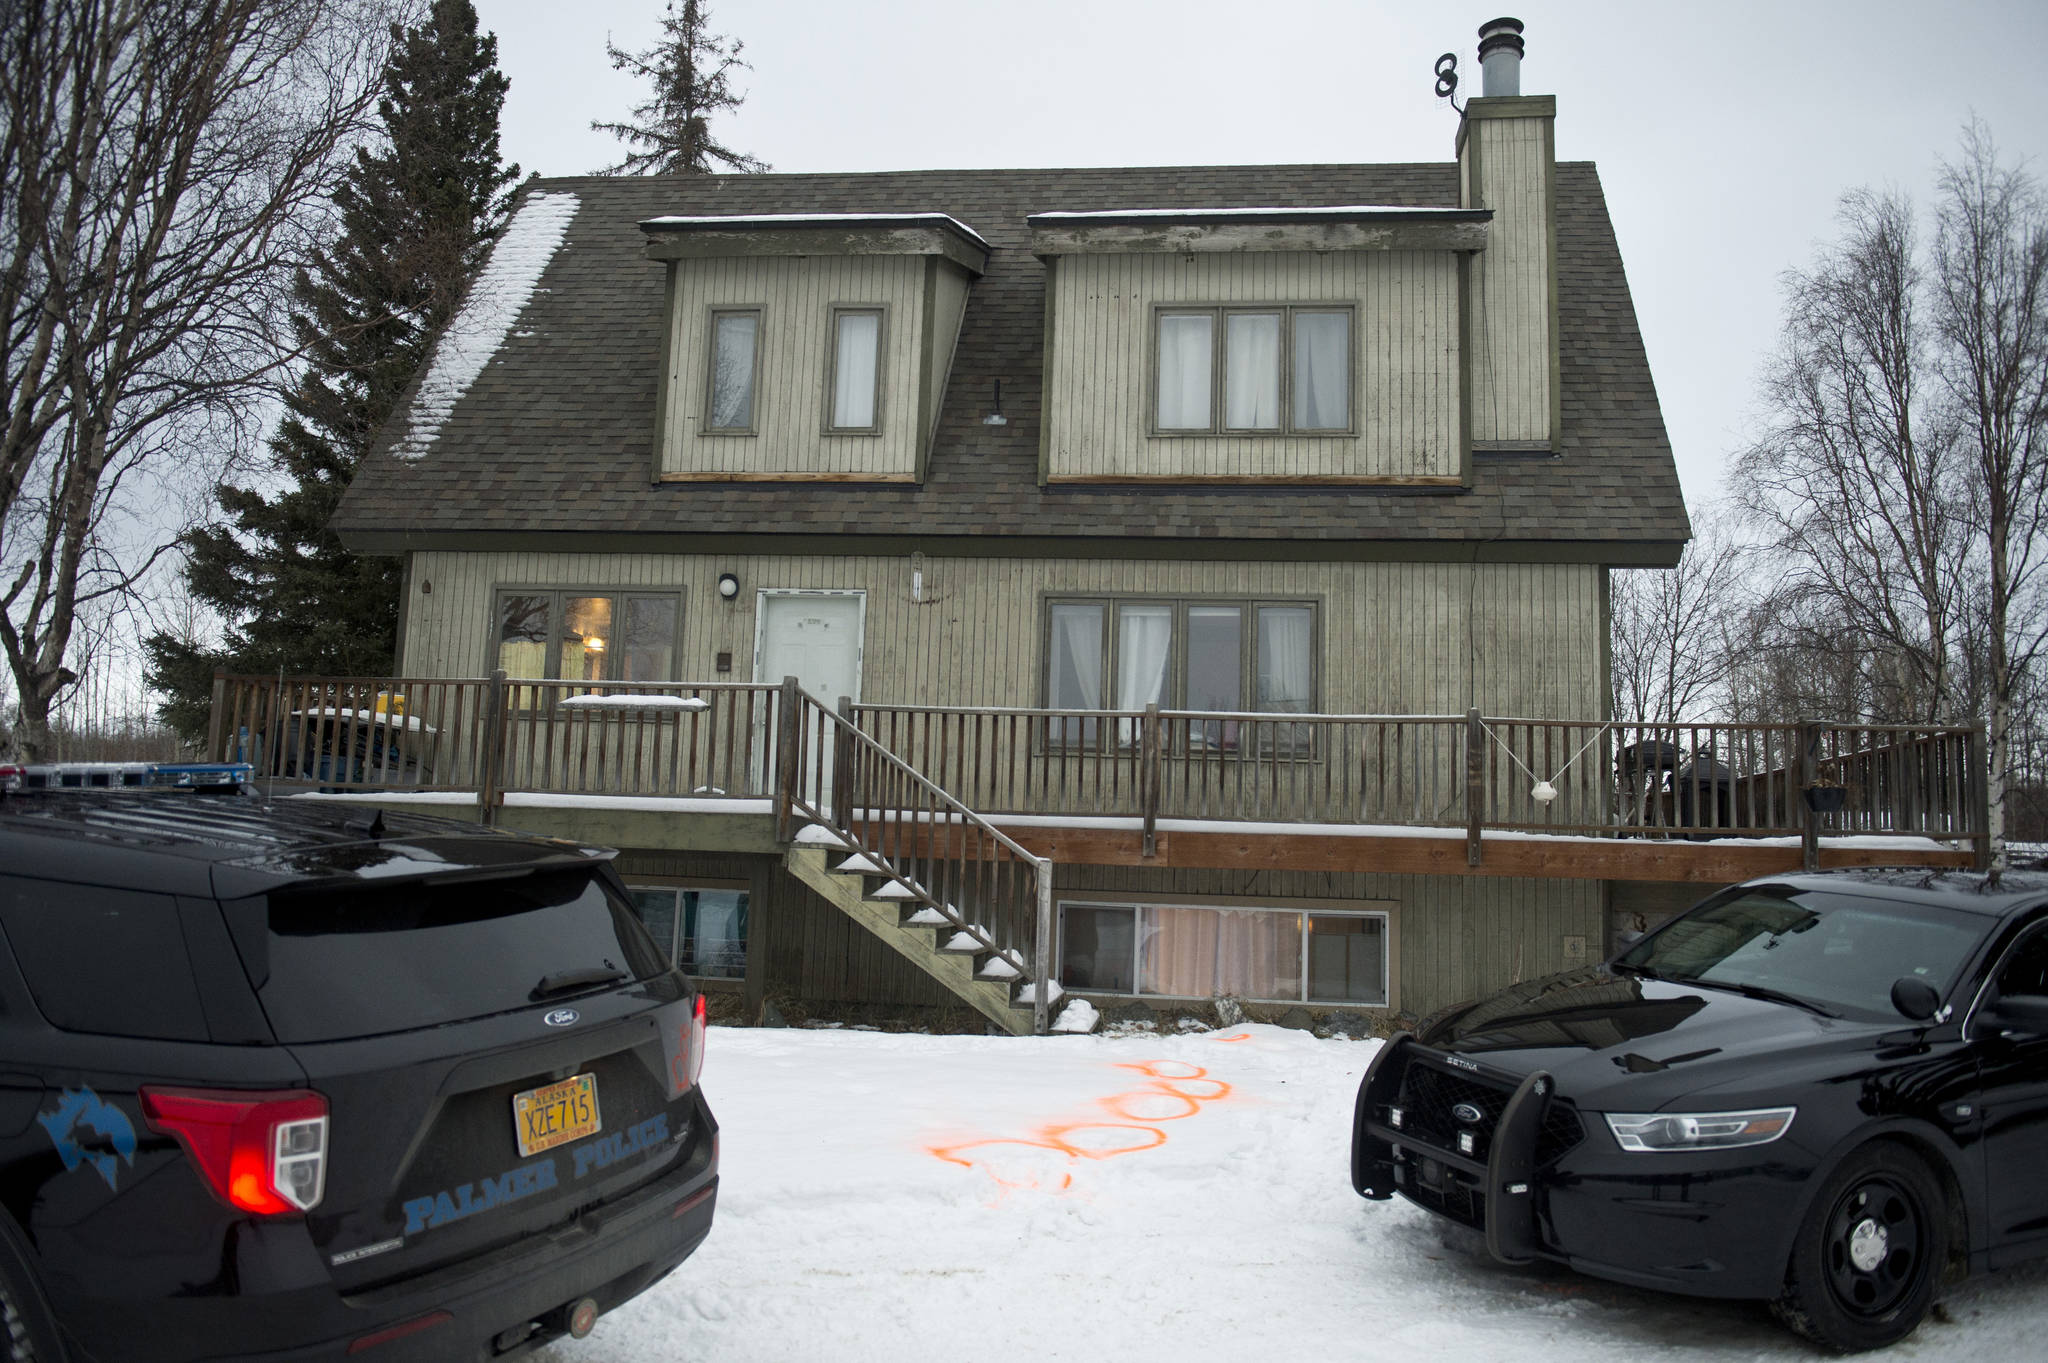 Associated Press
Alaska State Troopers investigate a fatal shooting scene at a home on North Valley Way in Palmer, on Monday.